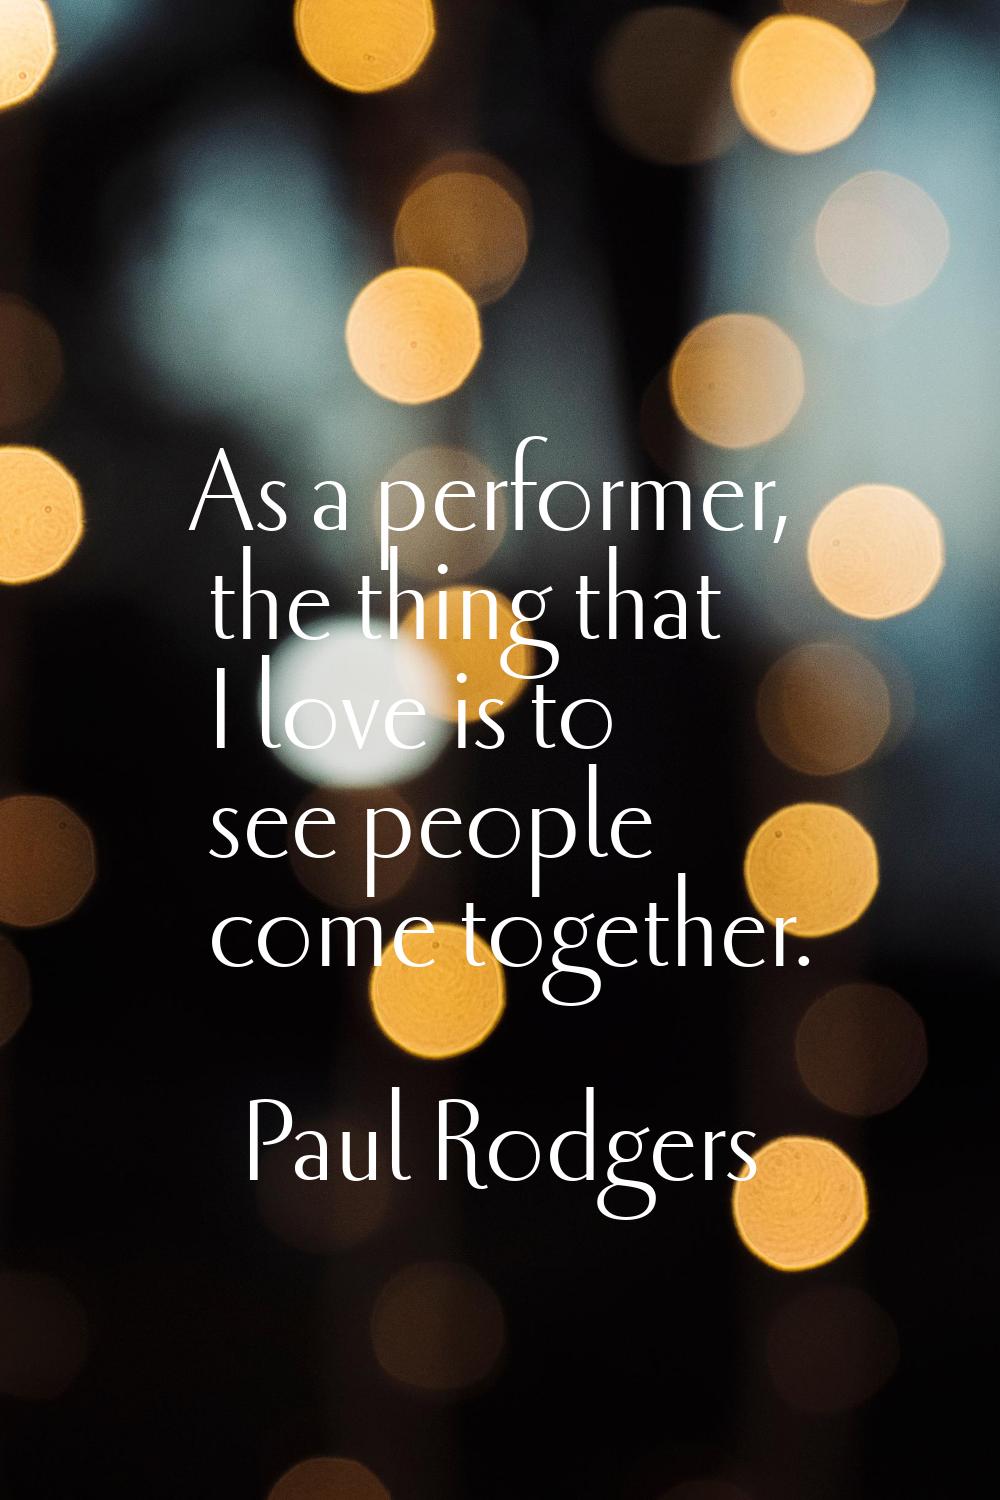 As a performer, the thing that I love is to see people come together.